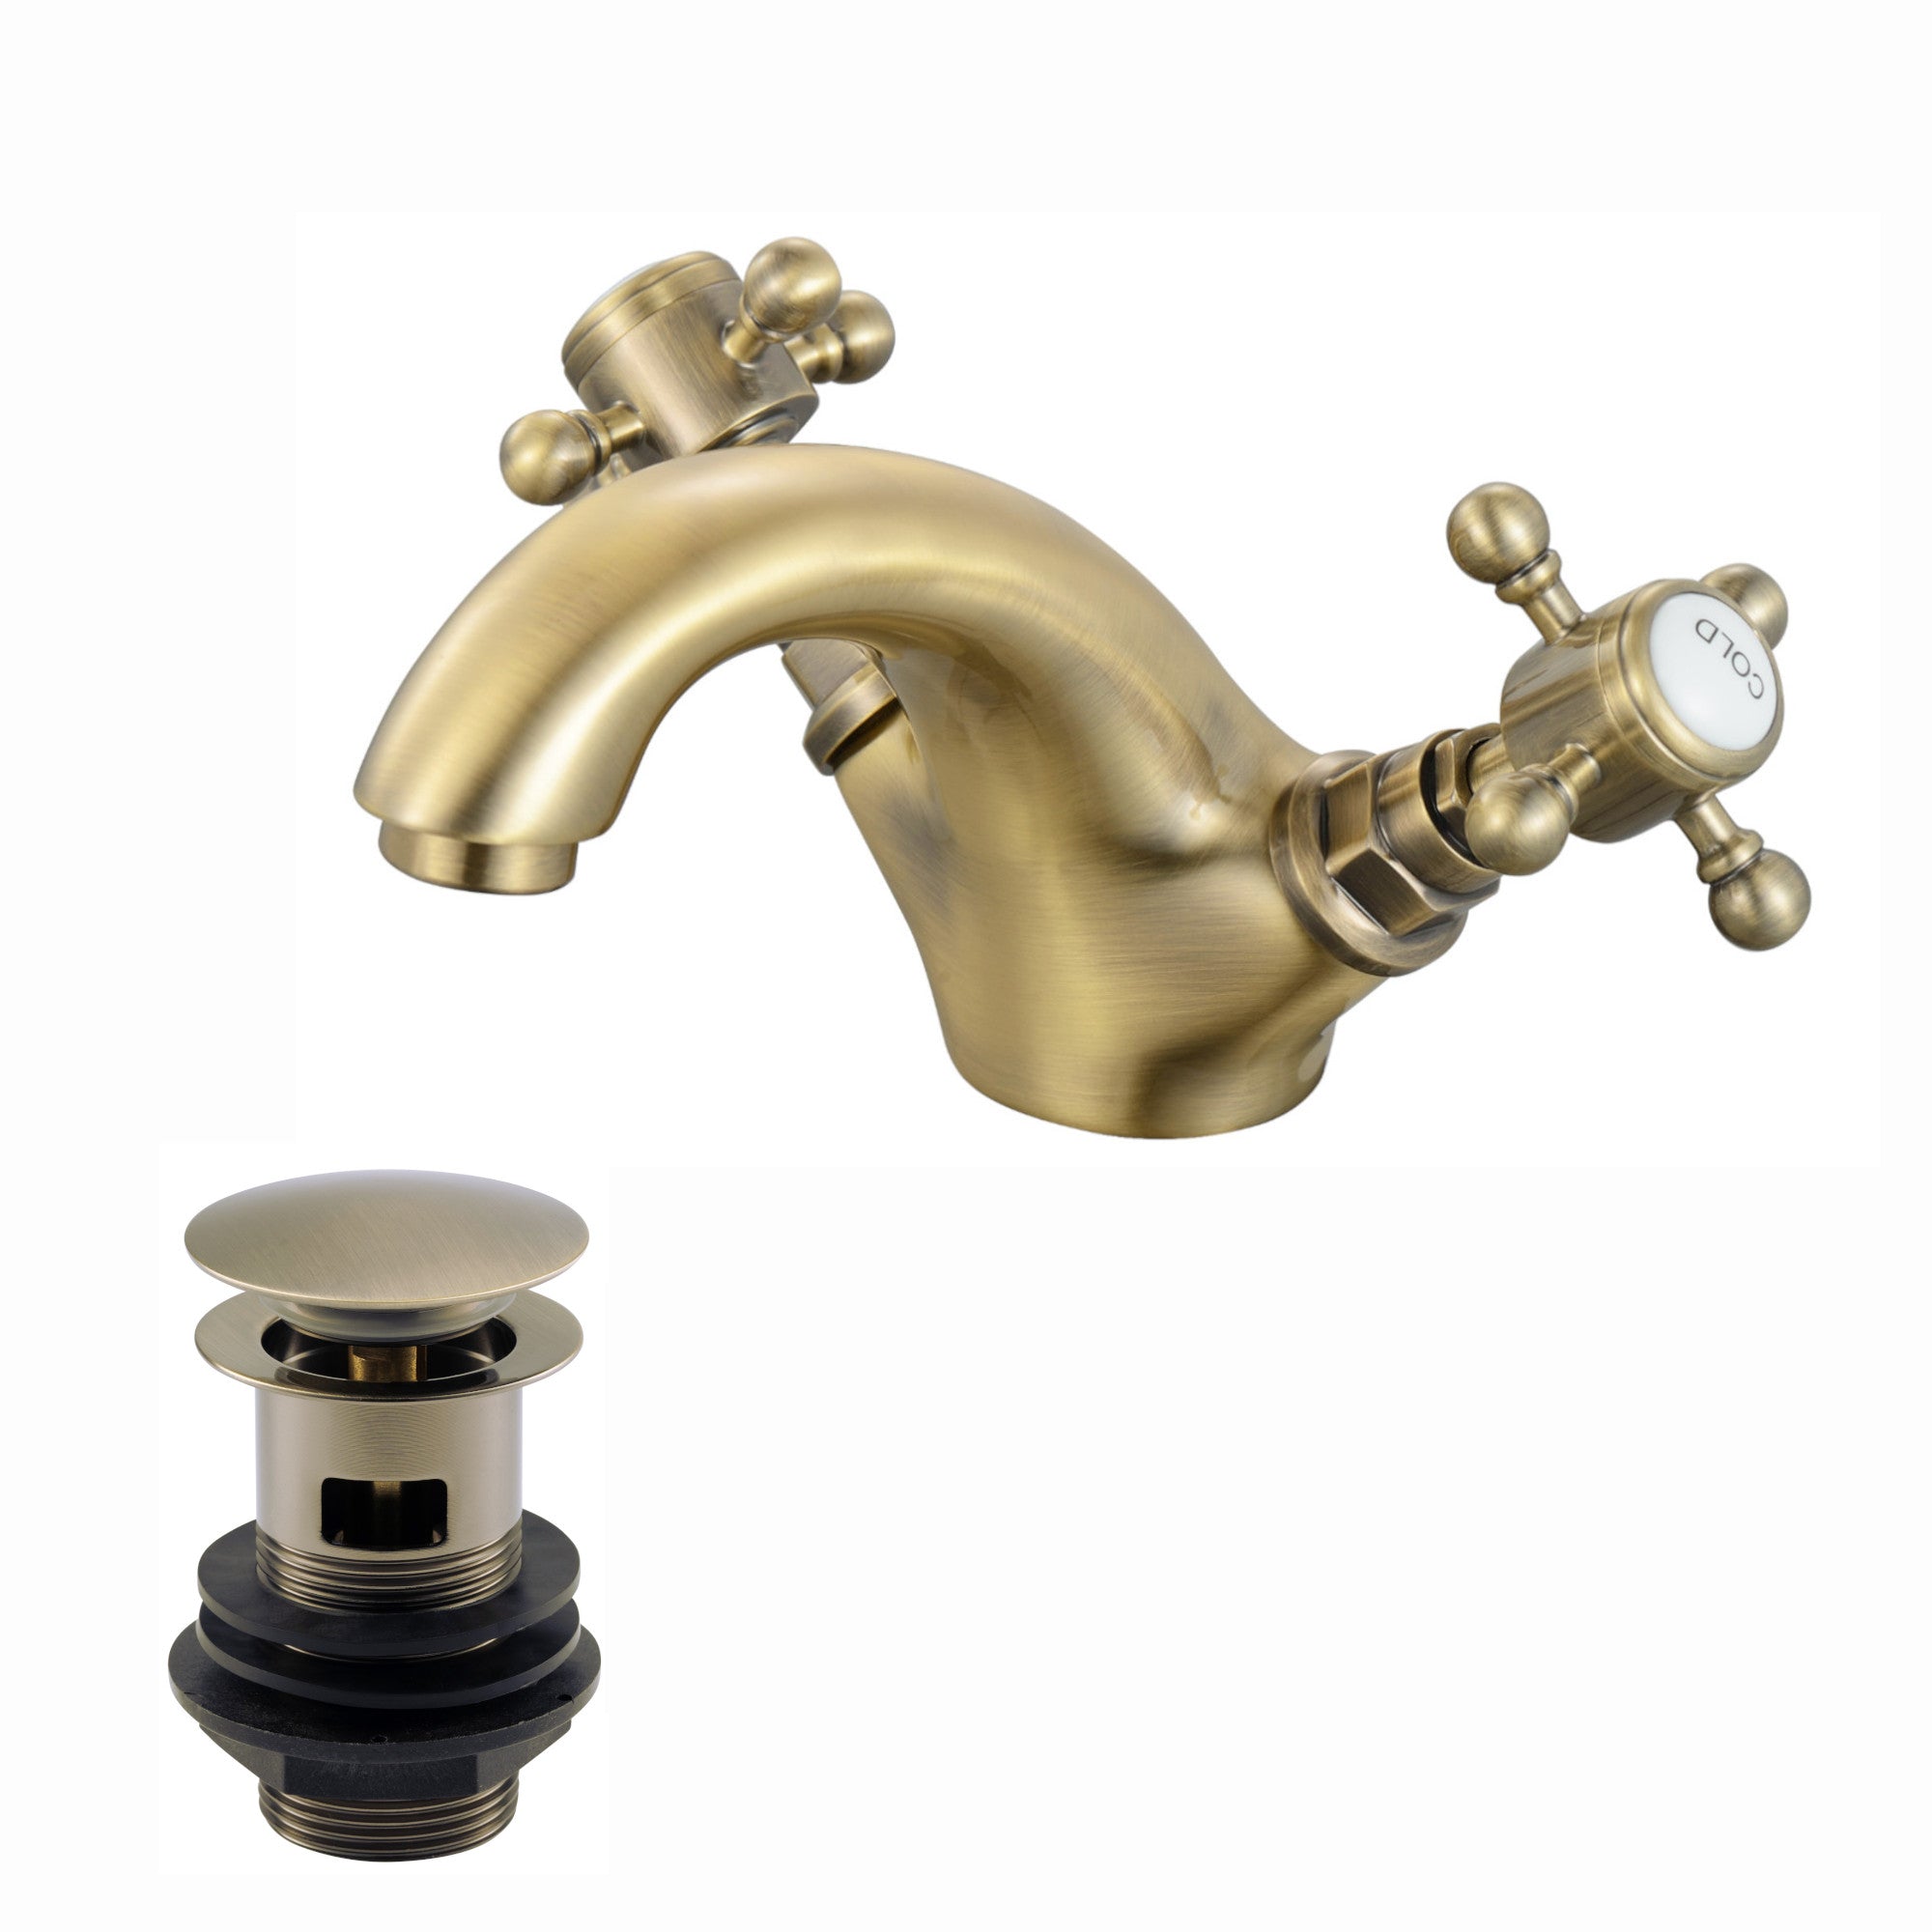 Camberley traditional cross basin mixer tap with slotted waste - antique bronze